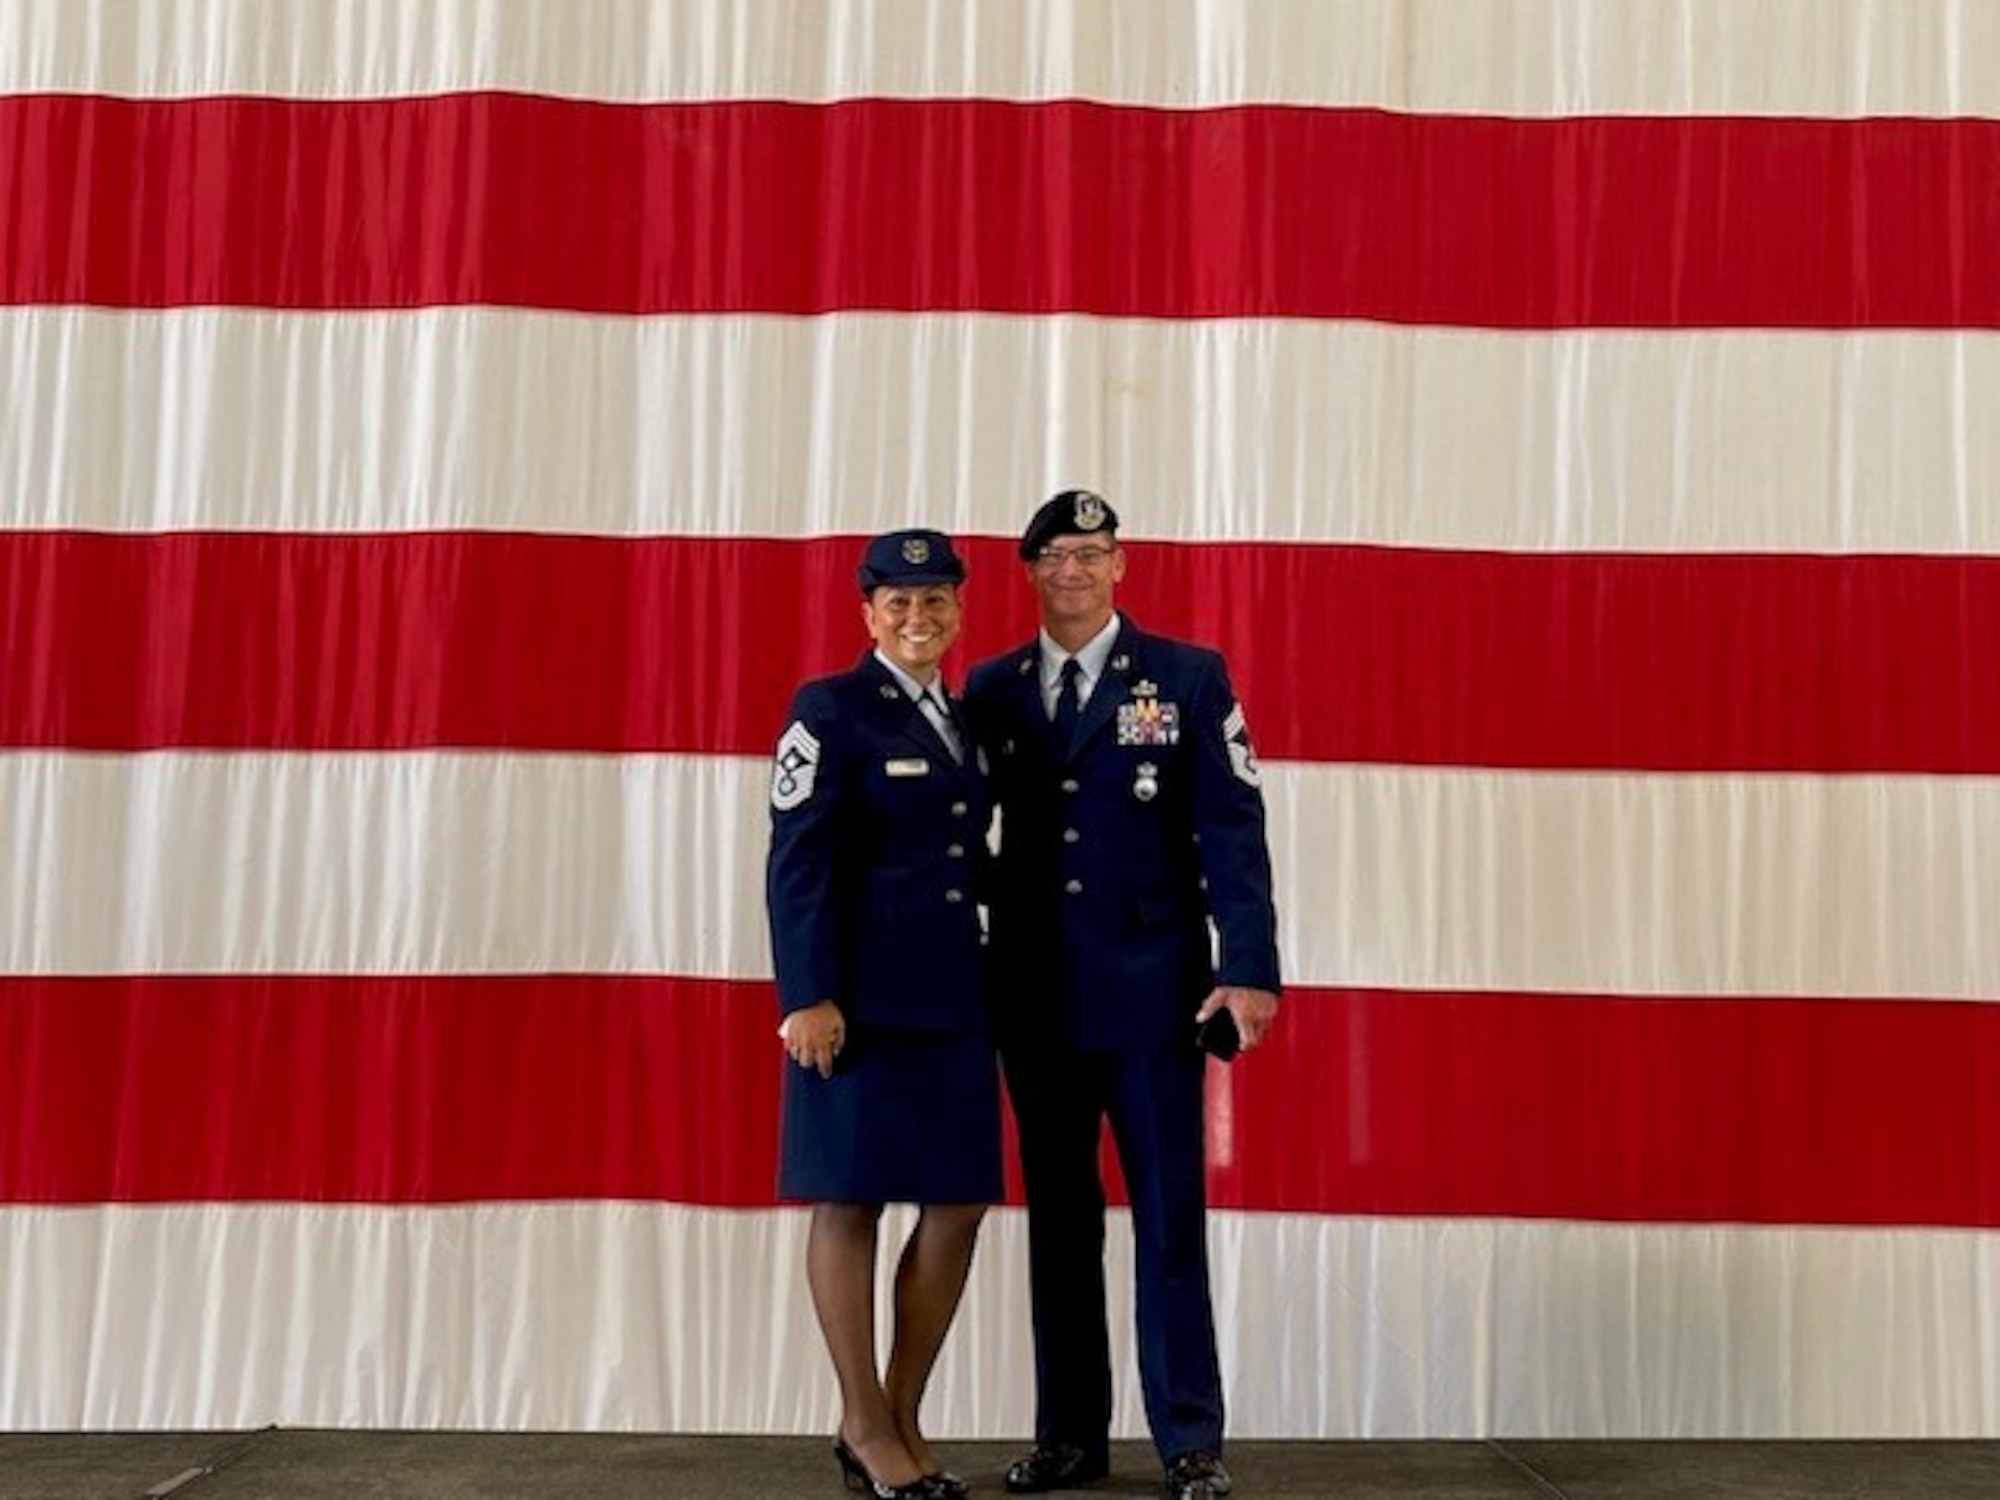 Chief Master Sgt. Sevin Balkuvvar and Chief Master Sgt. Lambert pose for photo.